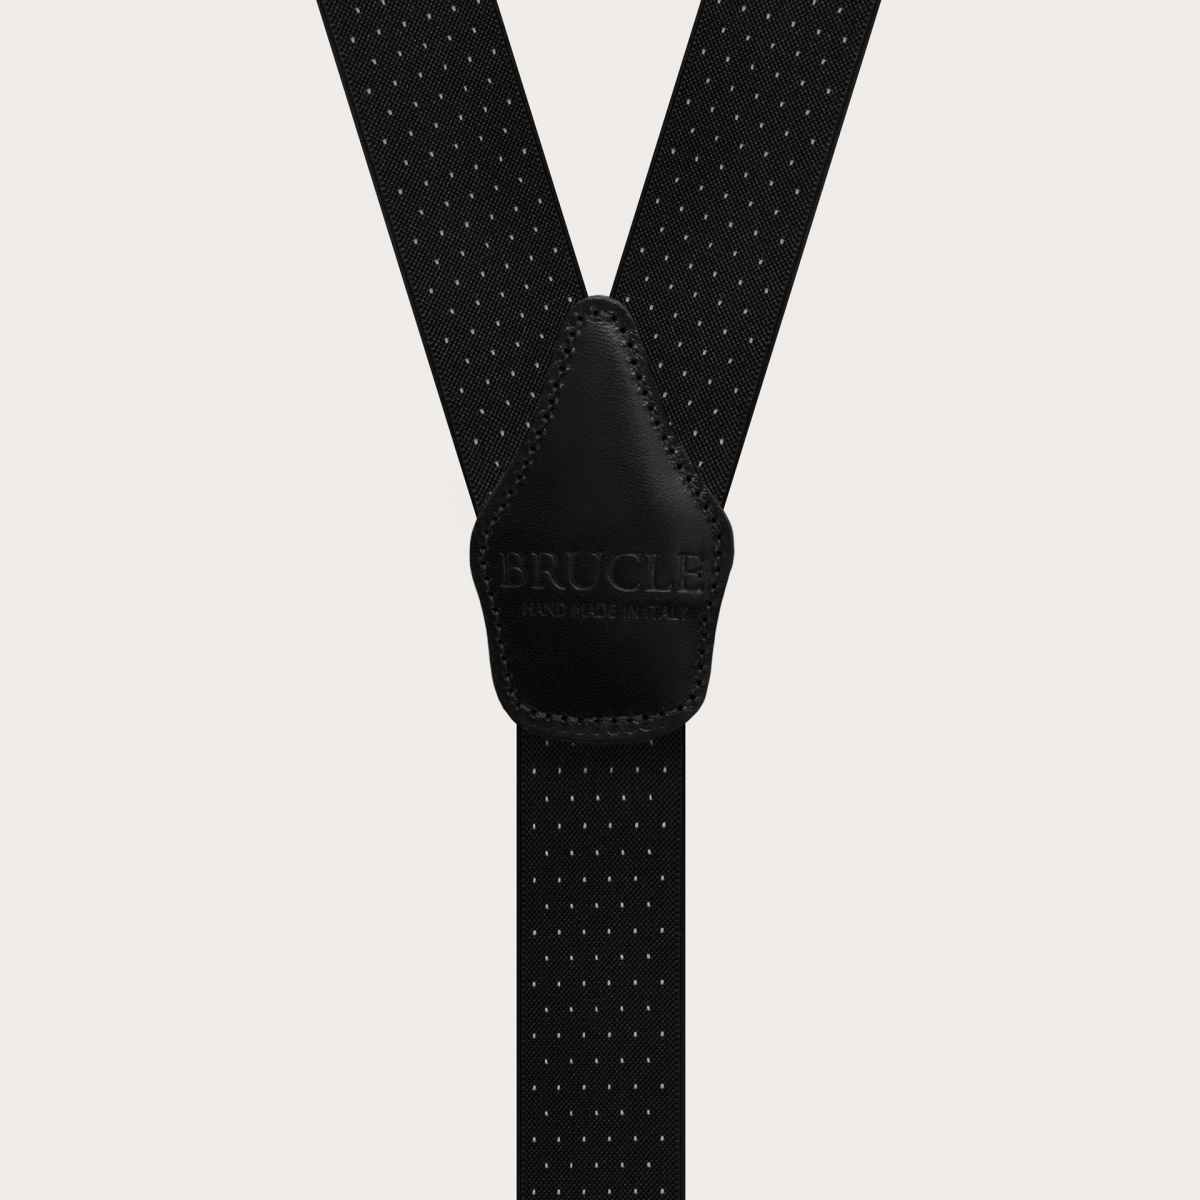 BRUCLE Y-shape black elastic suspenders with dotted pattern